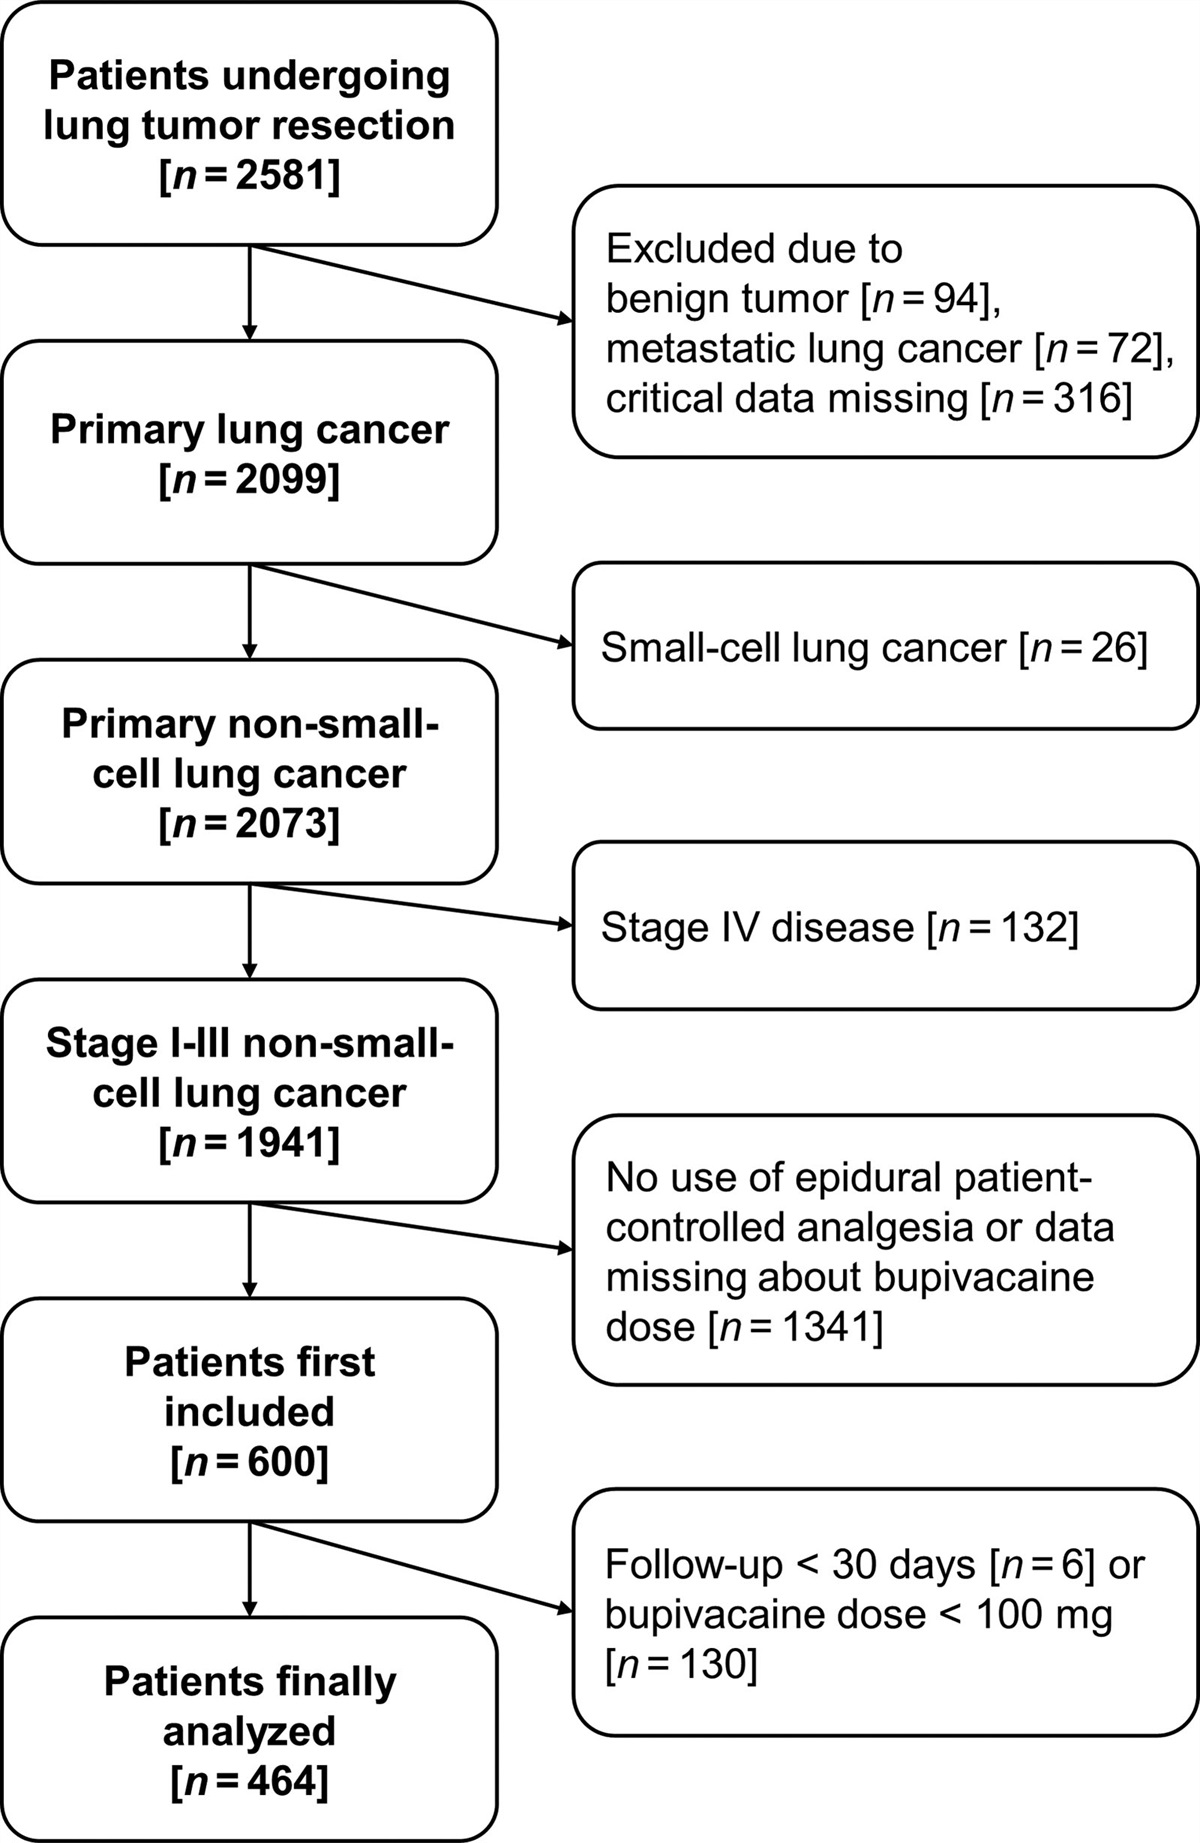 Dose-response relationship between epidural bupivacaine dose and mortality risk after surgical resection of nonsmall-cell lung cancer